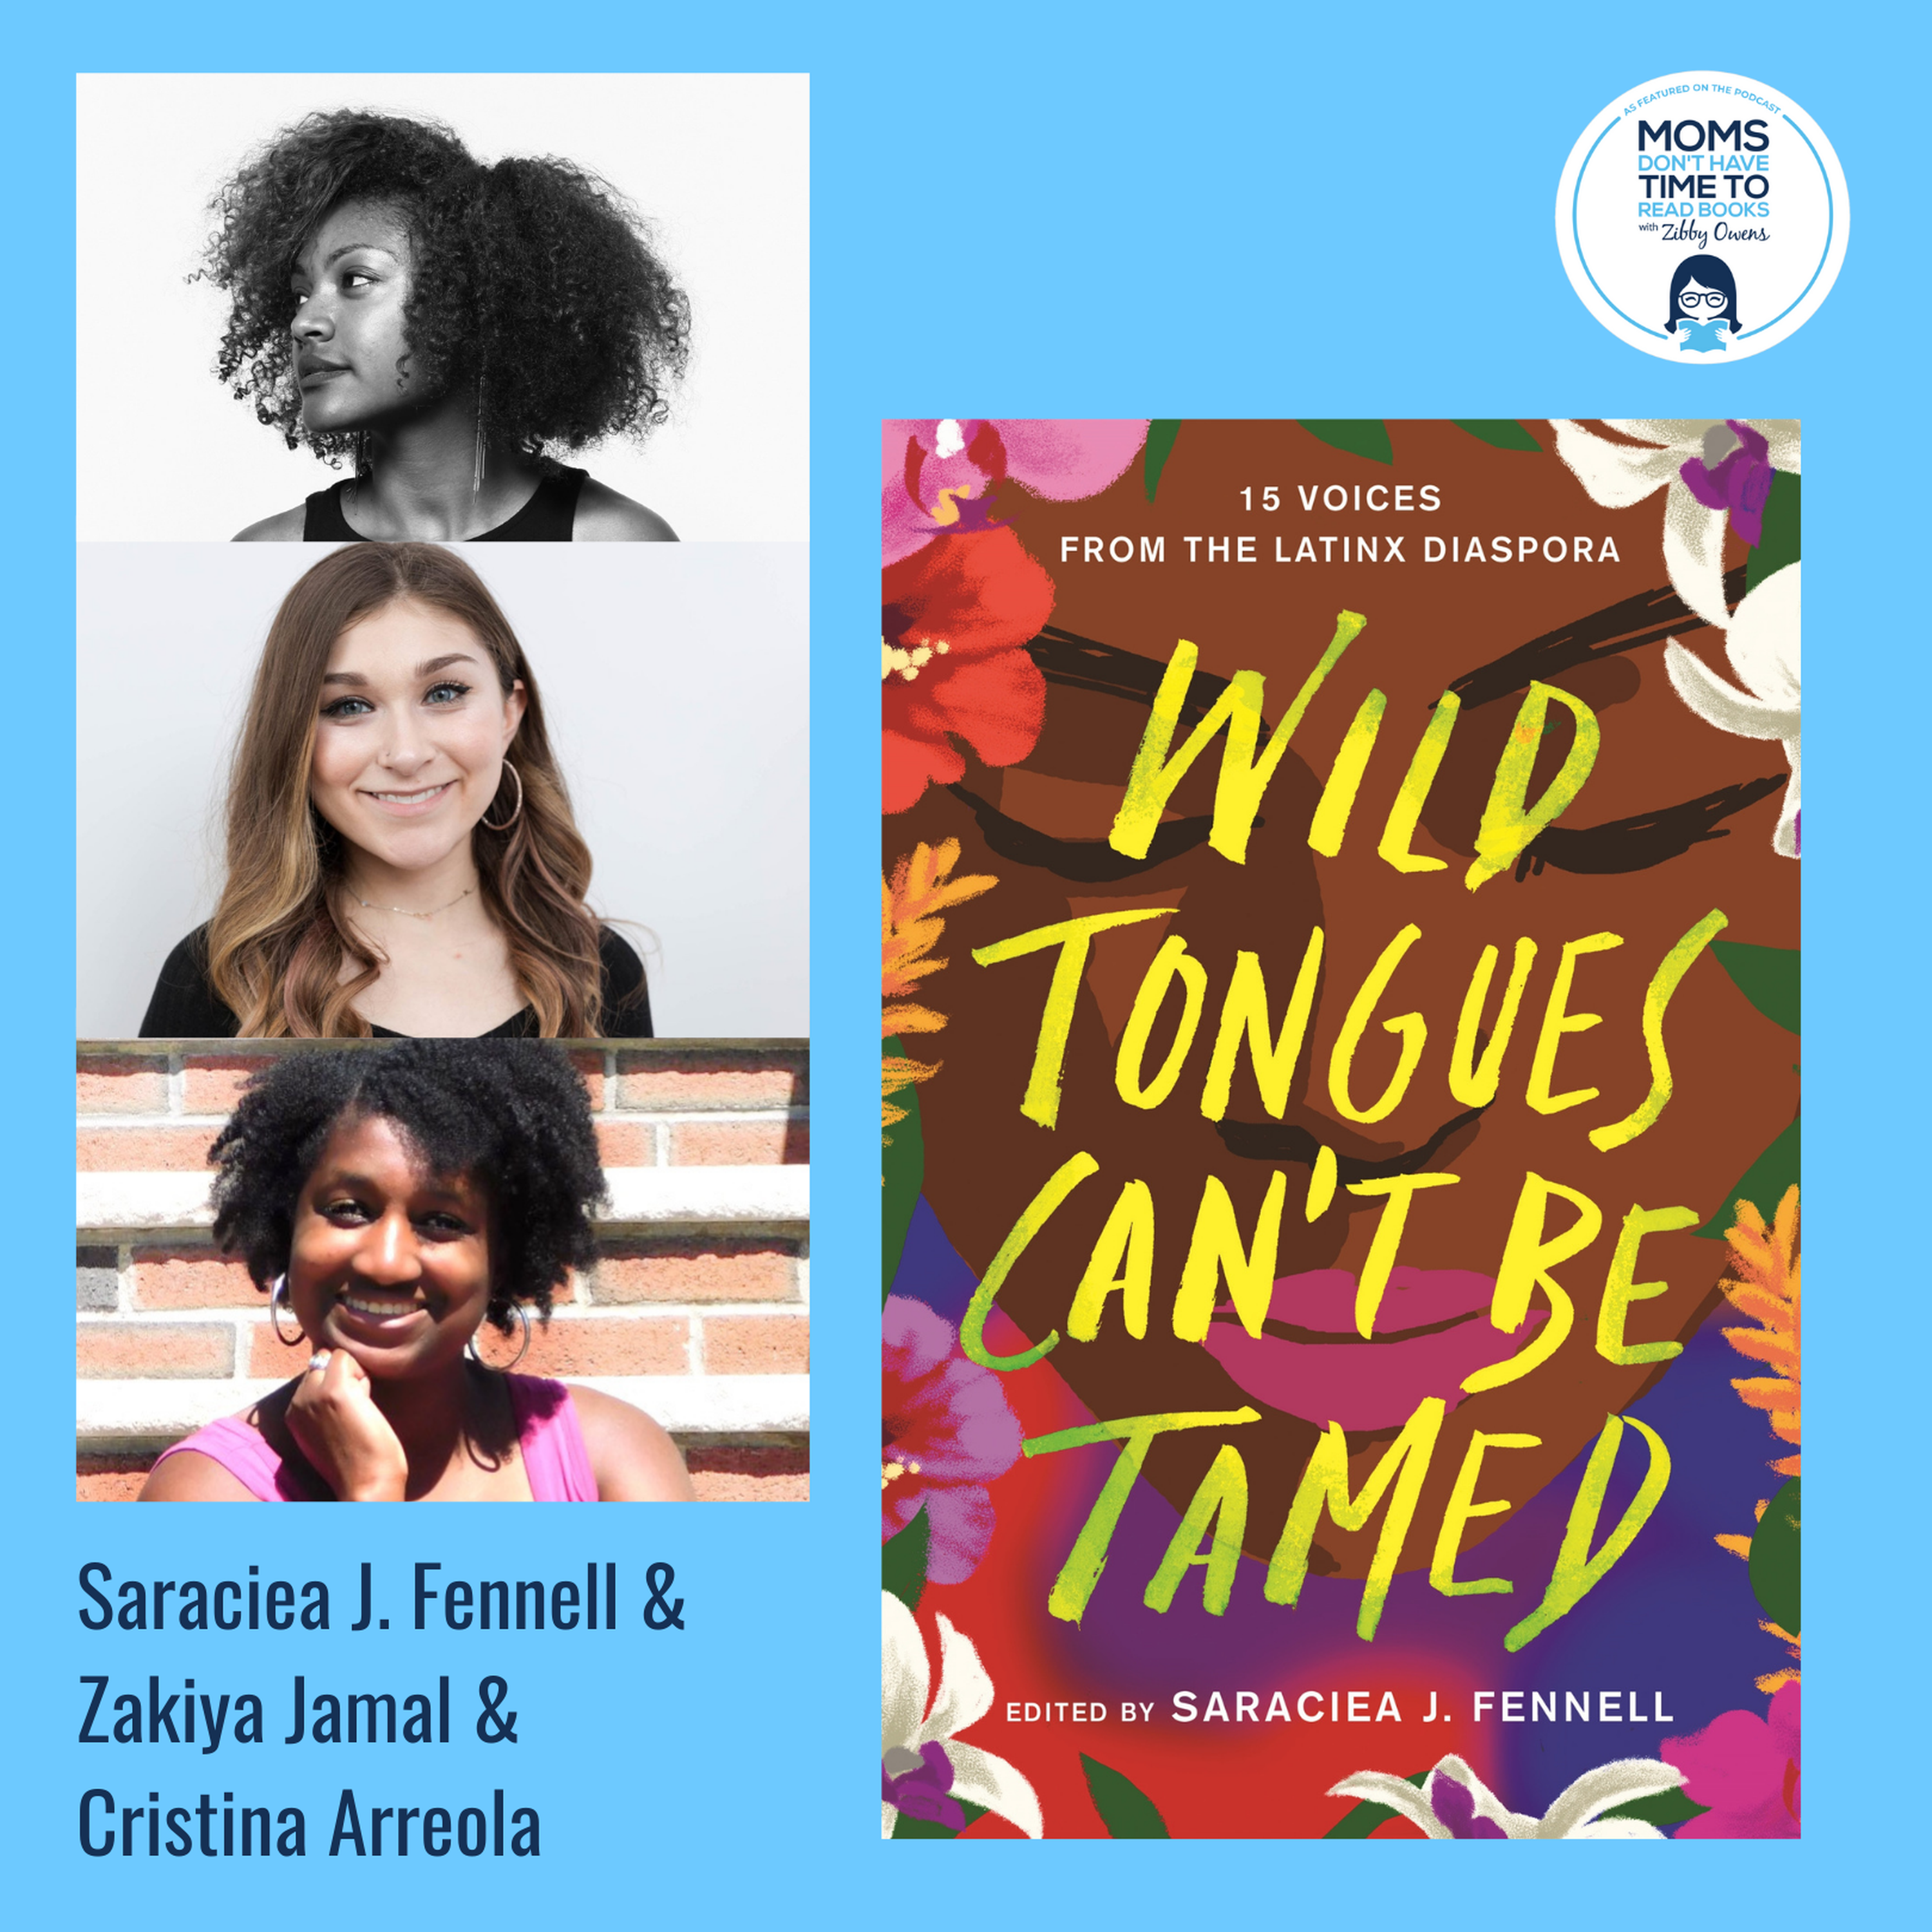 Saraciea J. Fennell with Zakiya Jamal and Cristina Arreola, WILD TONGUES CAN'T BE TAMED: 15 Voices from the Latinx Diaspora